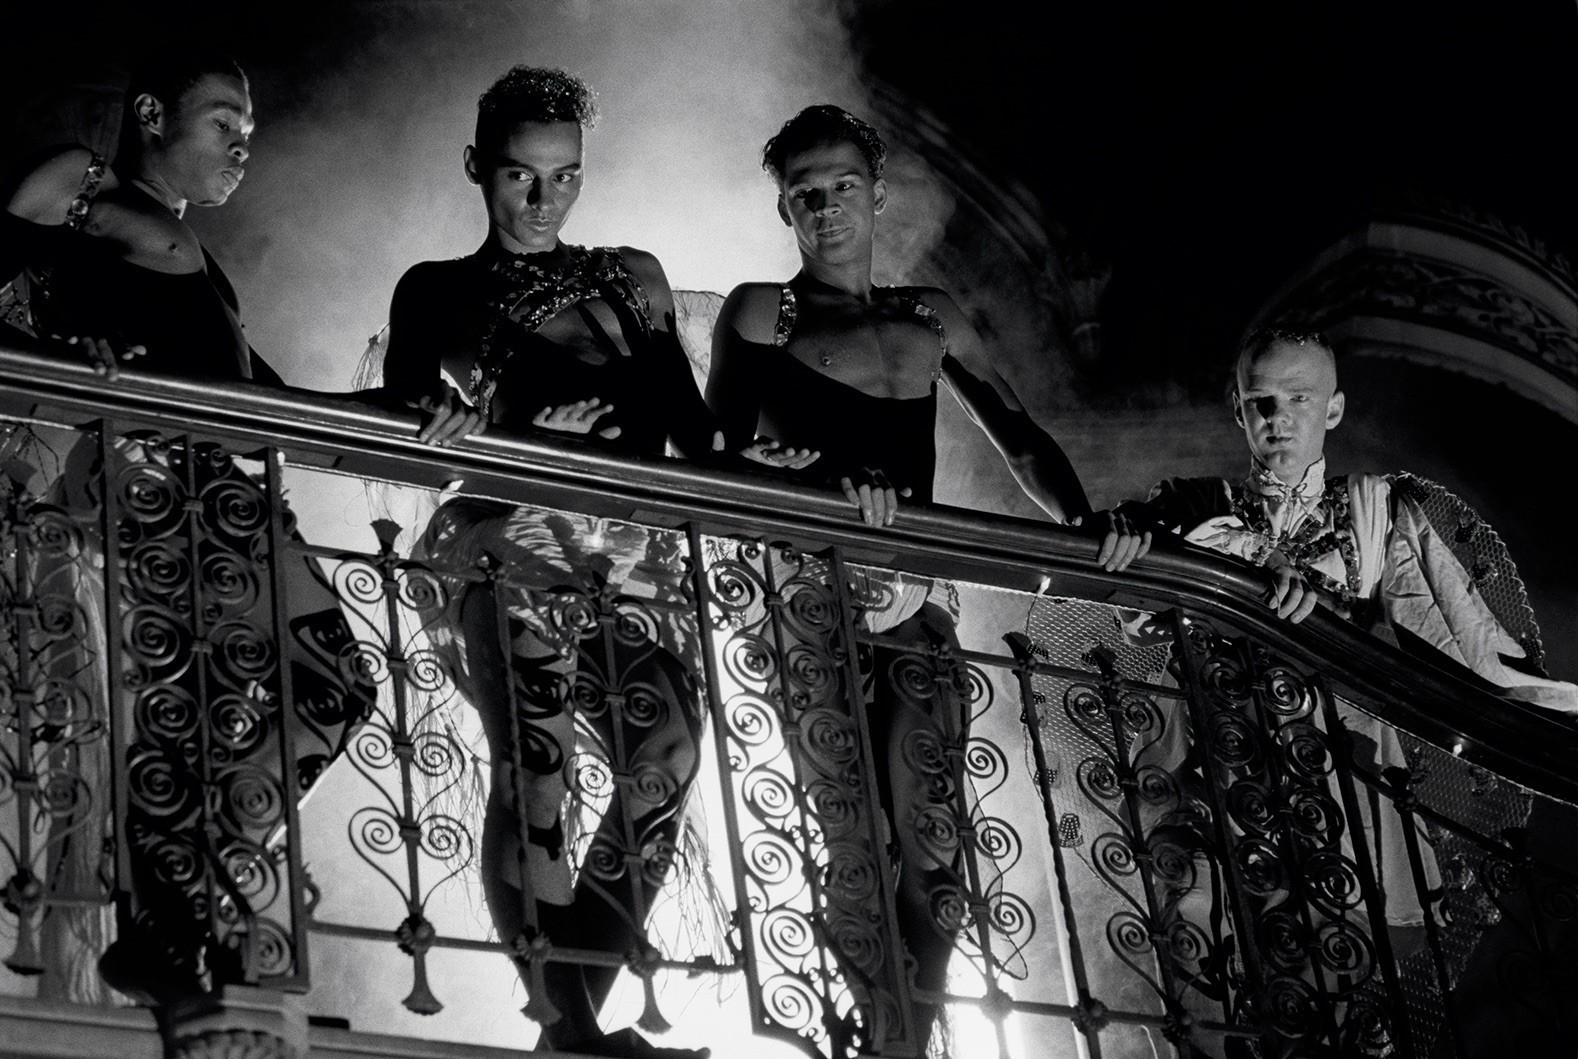 four men on in black and white photo standing on a balcony